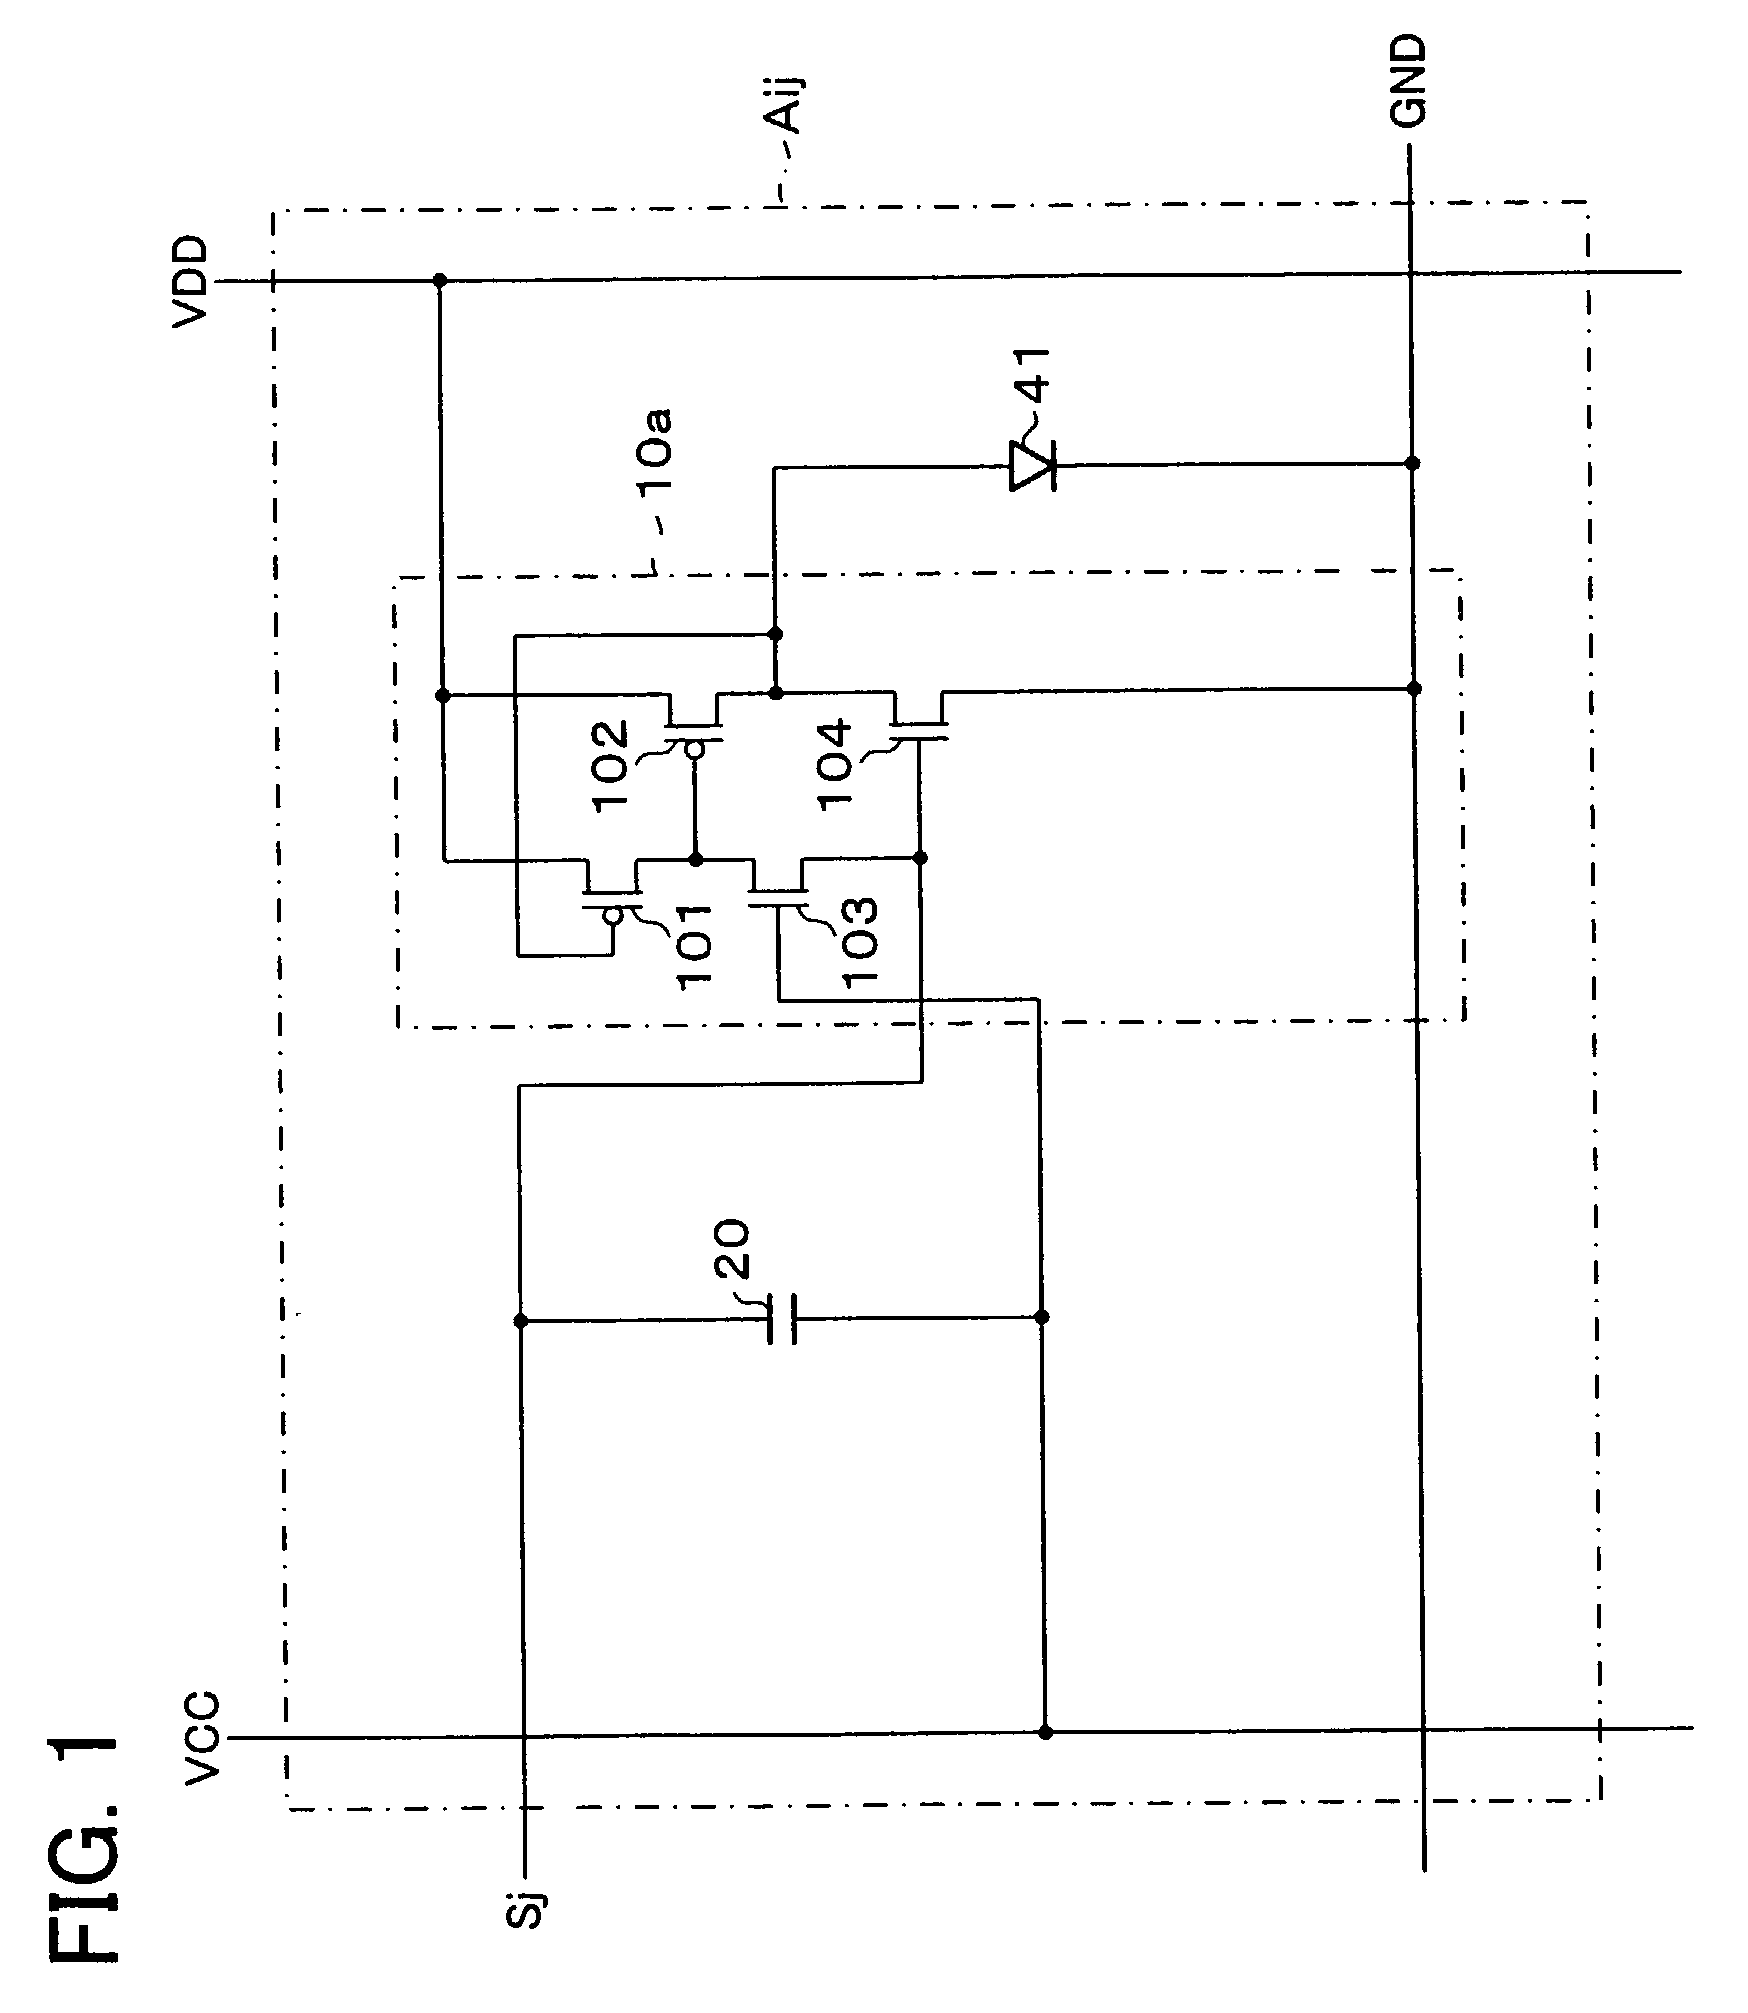 Display apparatus and portable device